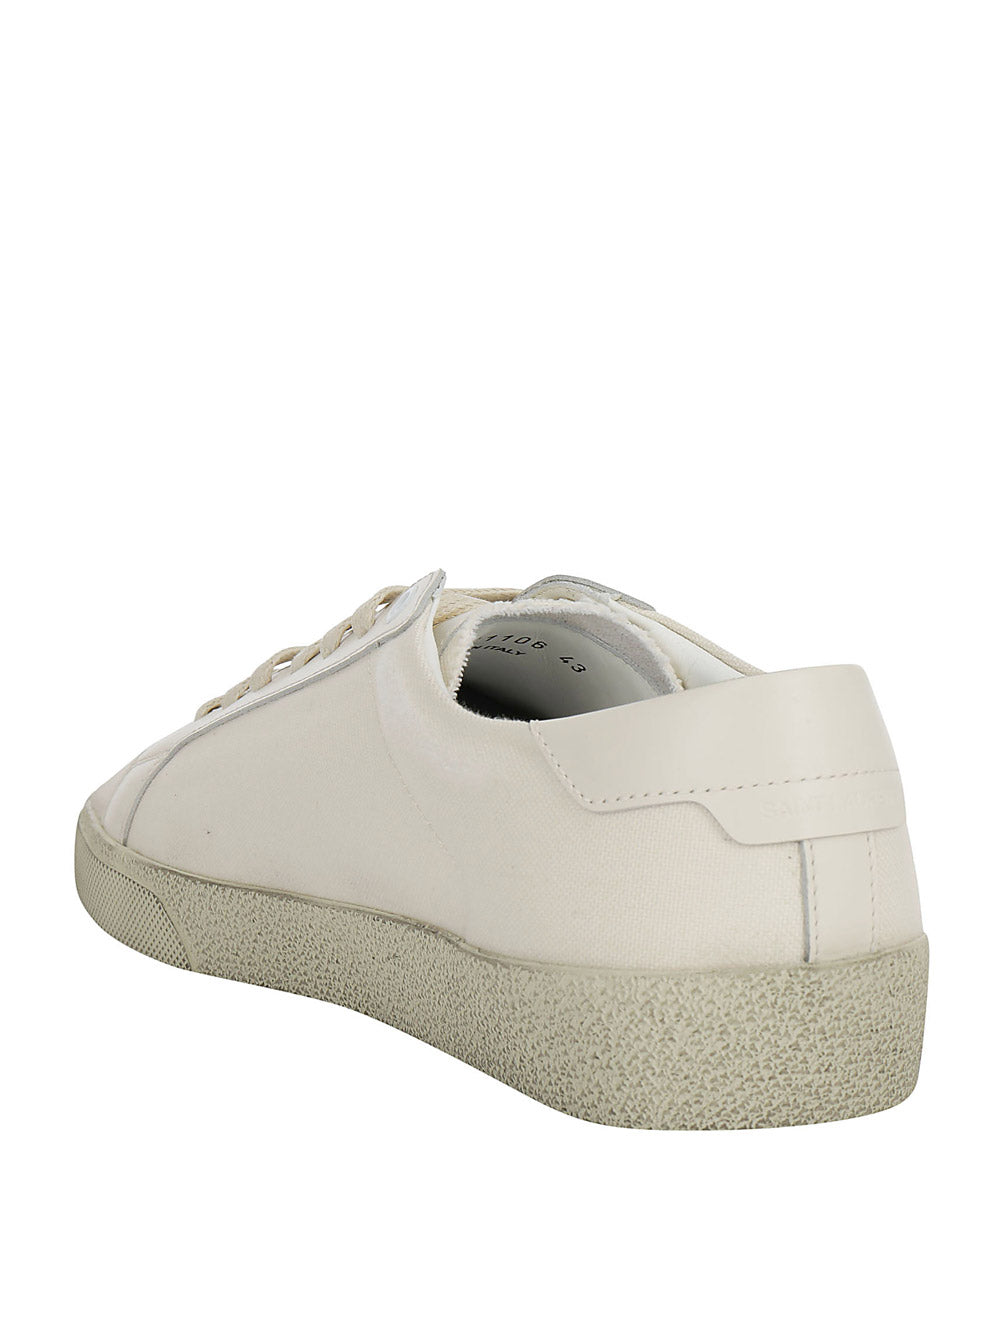 Court Classic SL/06 Sneakers Embroidered With Saint Laurent - White